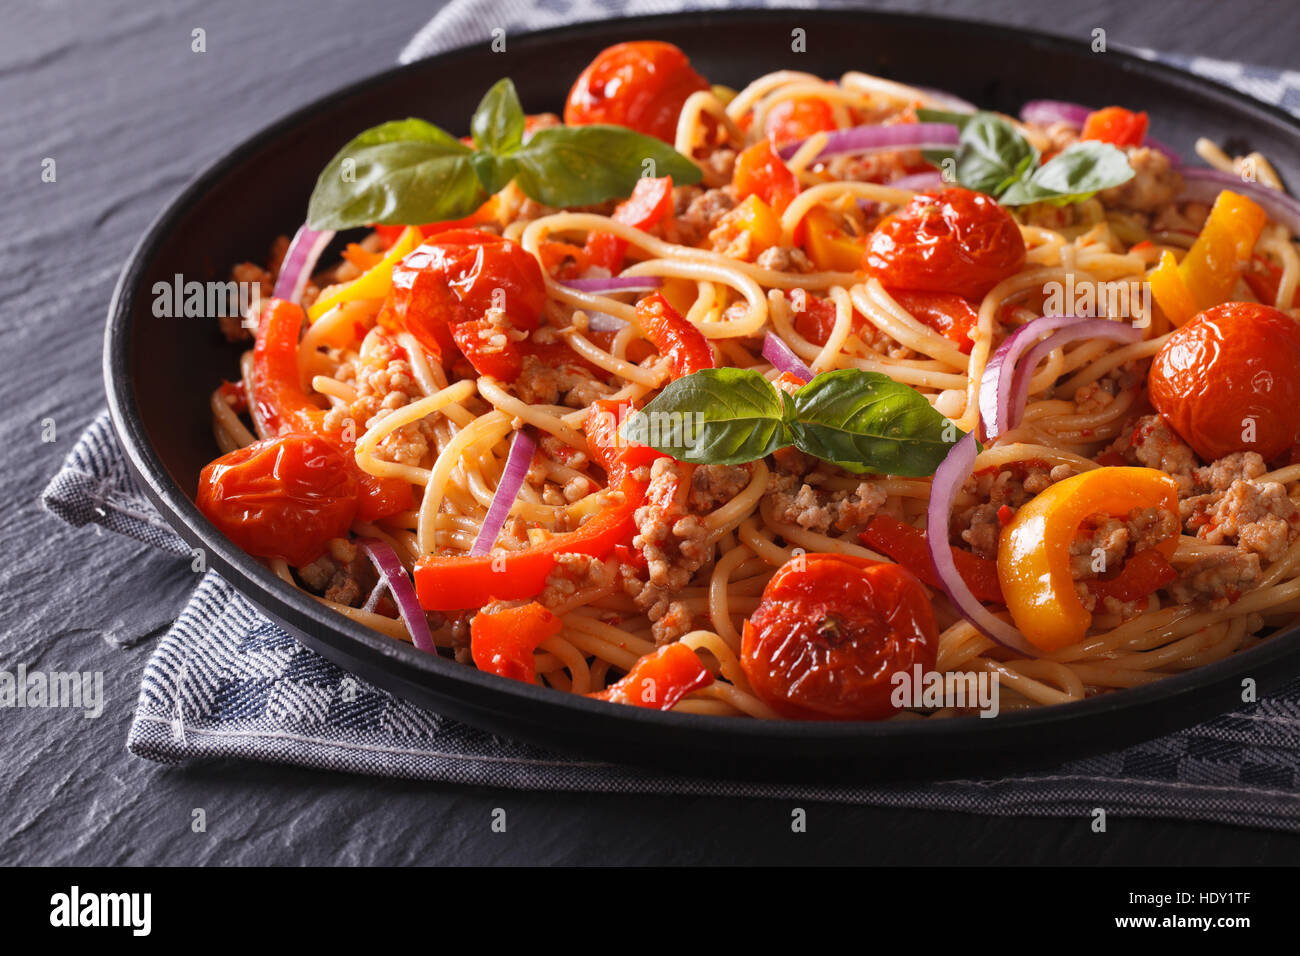 Italian food: pasta with minced meat and vegetables close-up. horizontal Stock Photo